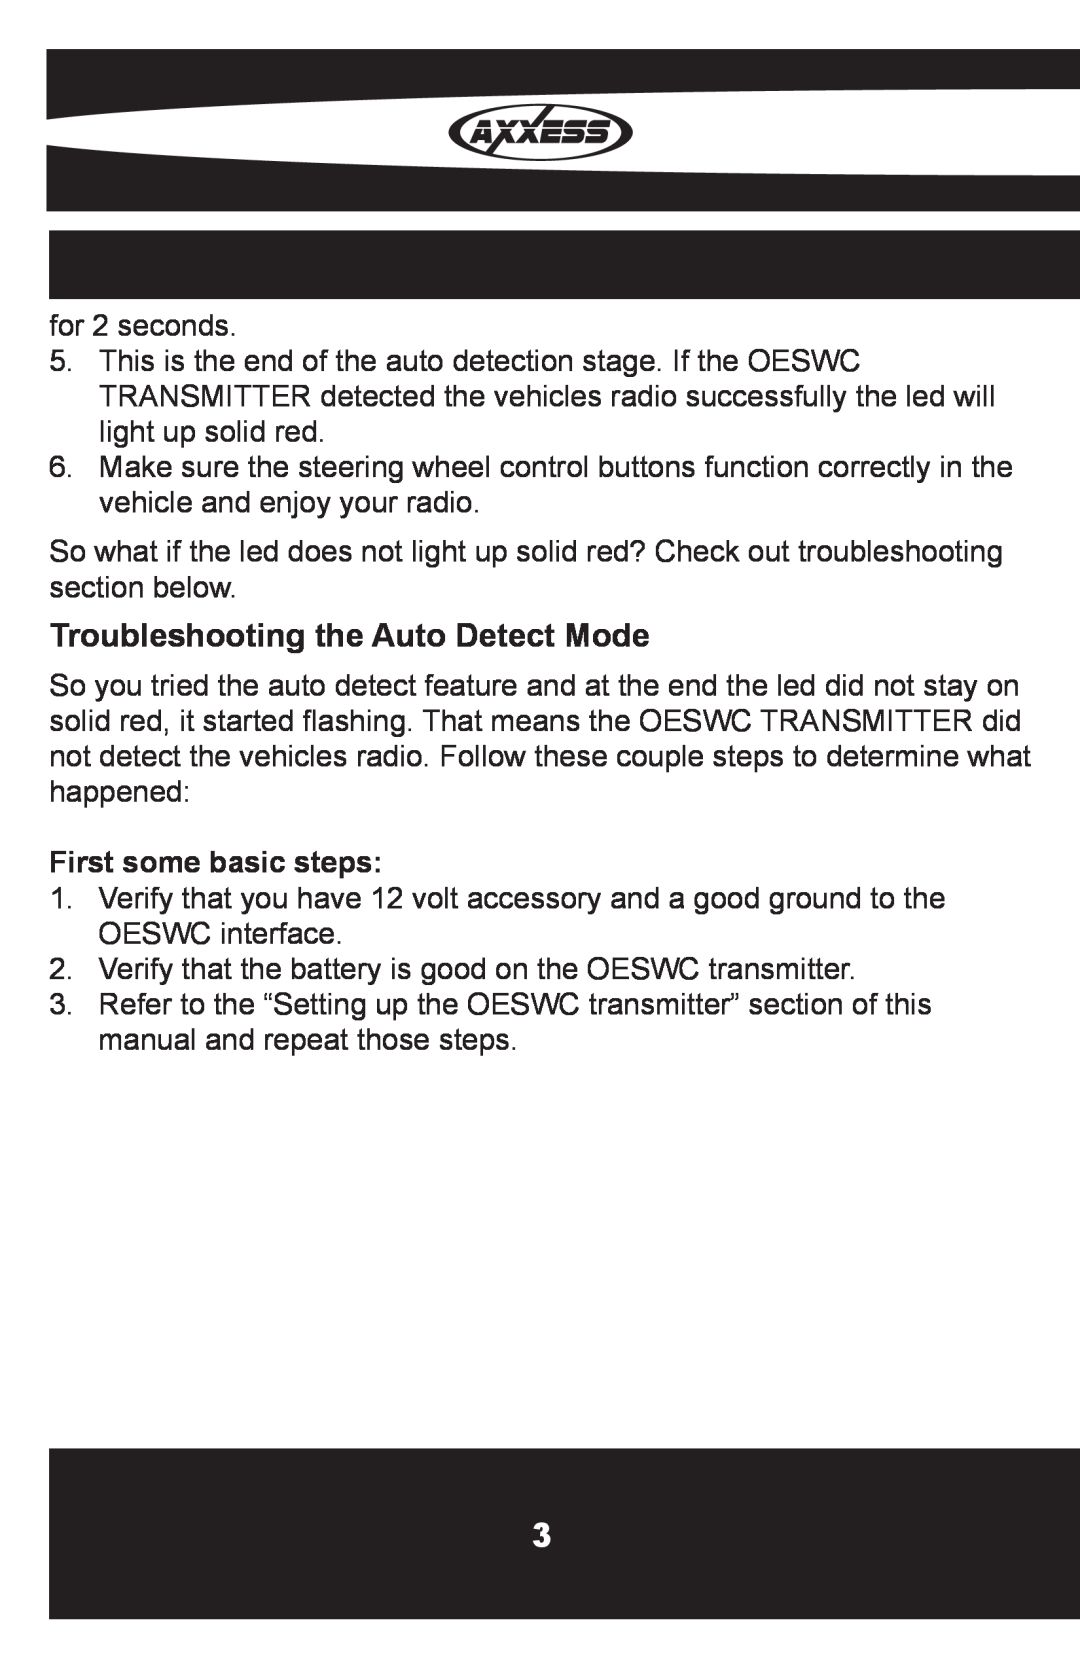 Axxess Interface OESWC-LAN29-RF installation instructions Troubleshooting the Auto Detect Mode, First some basic steps 